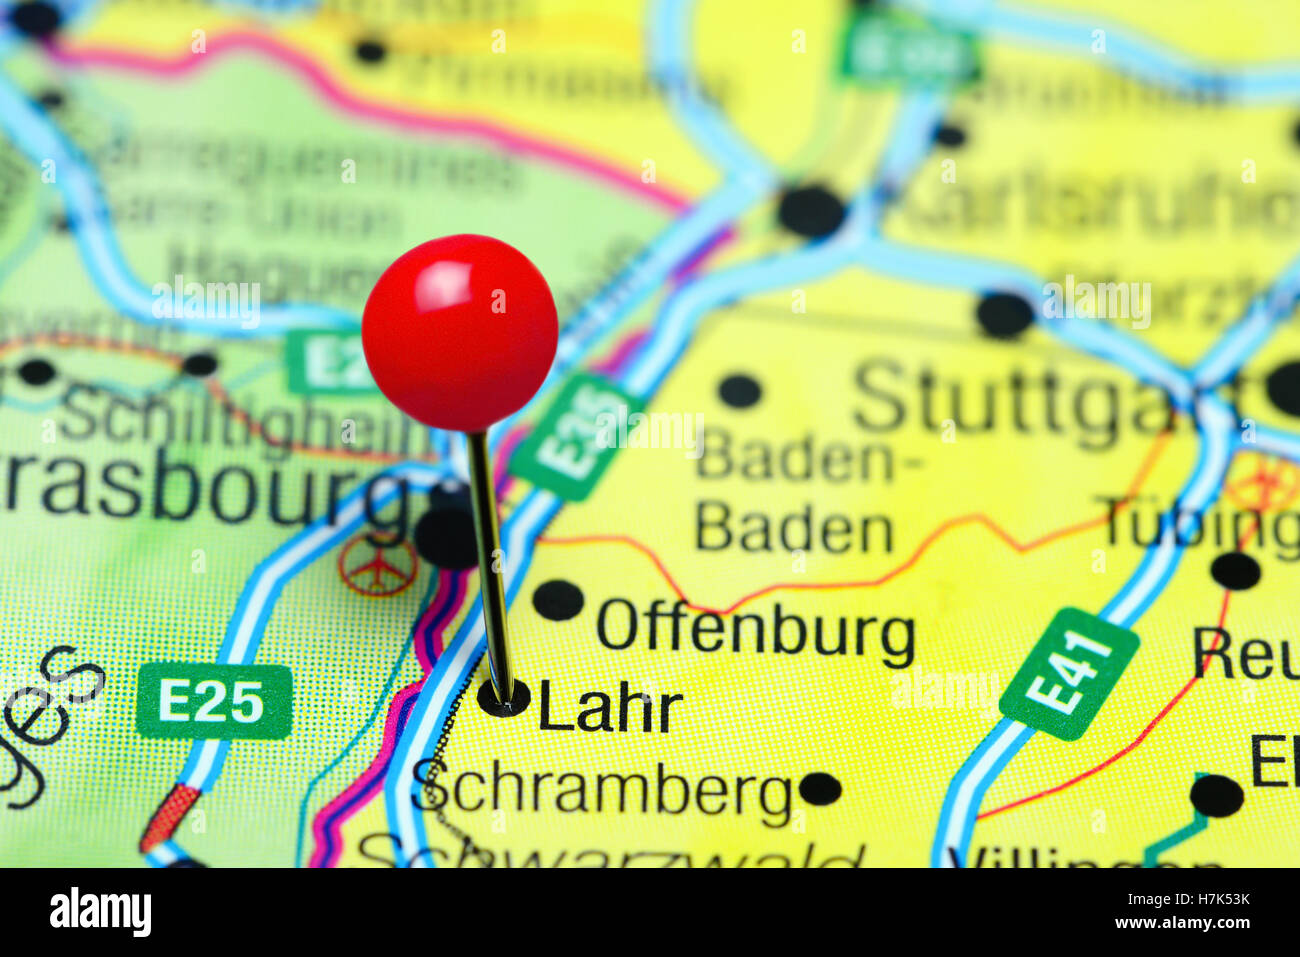 Lahr pinned on a map of Germany Stock Photo